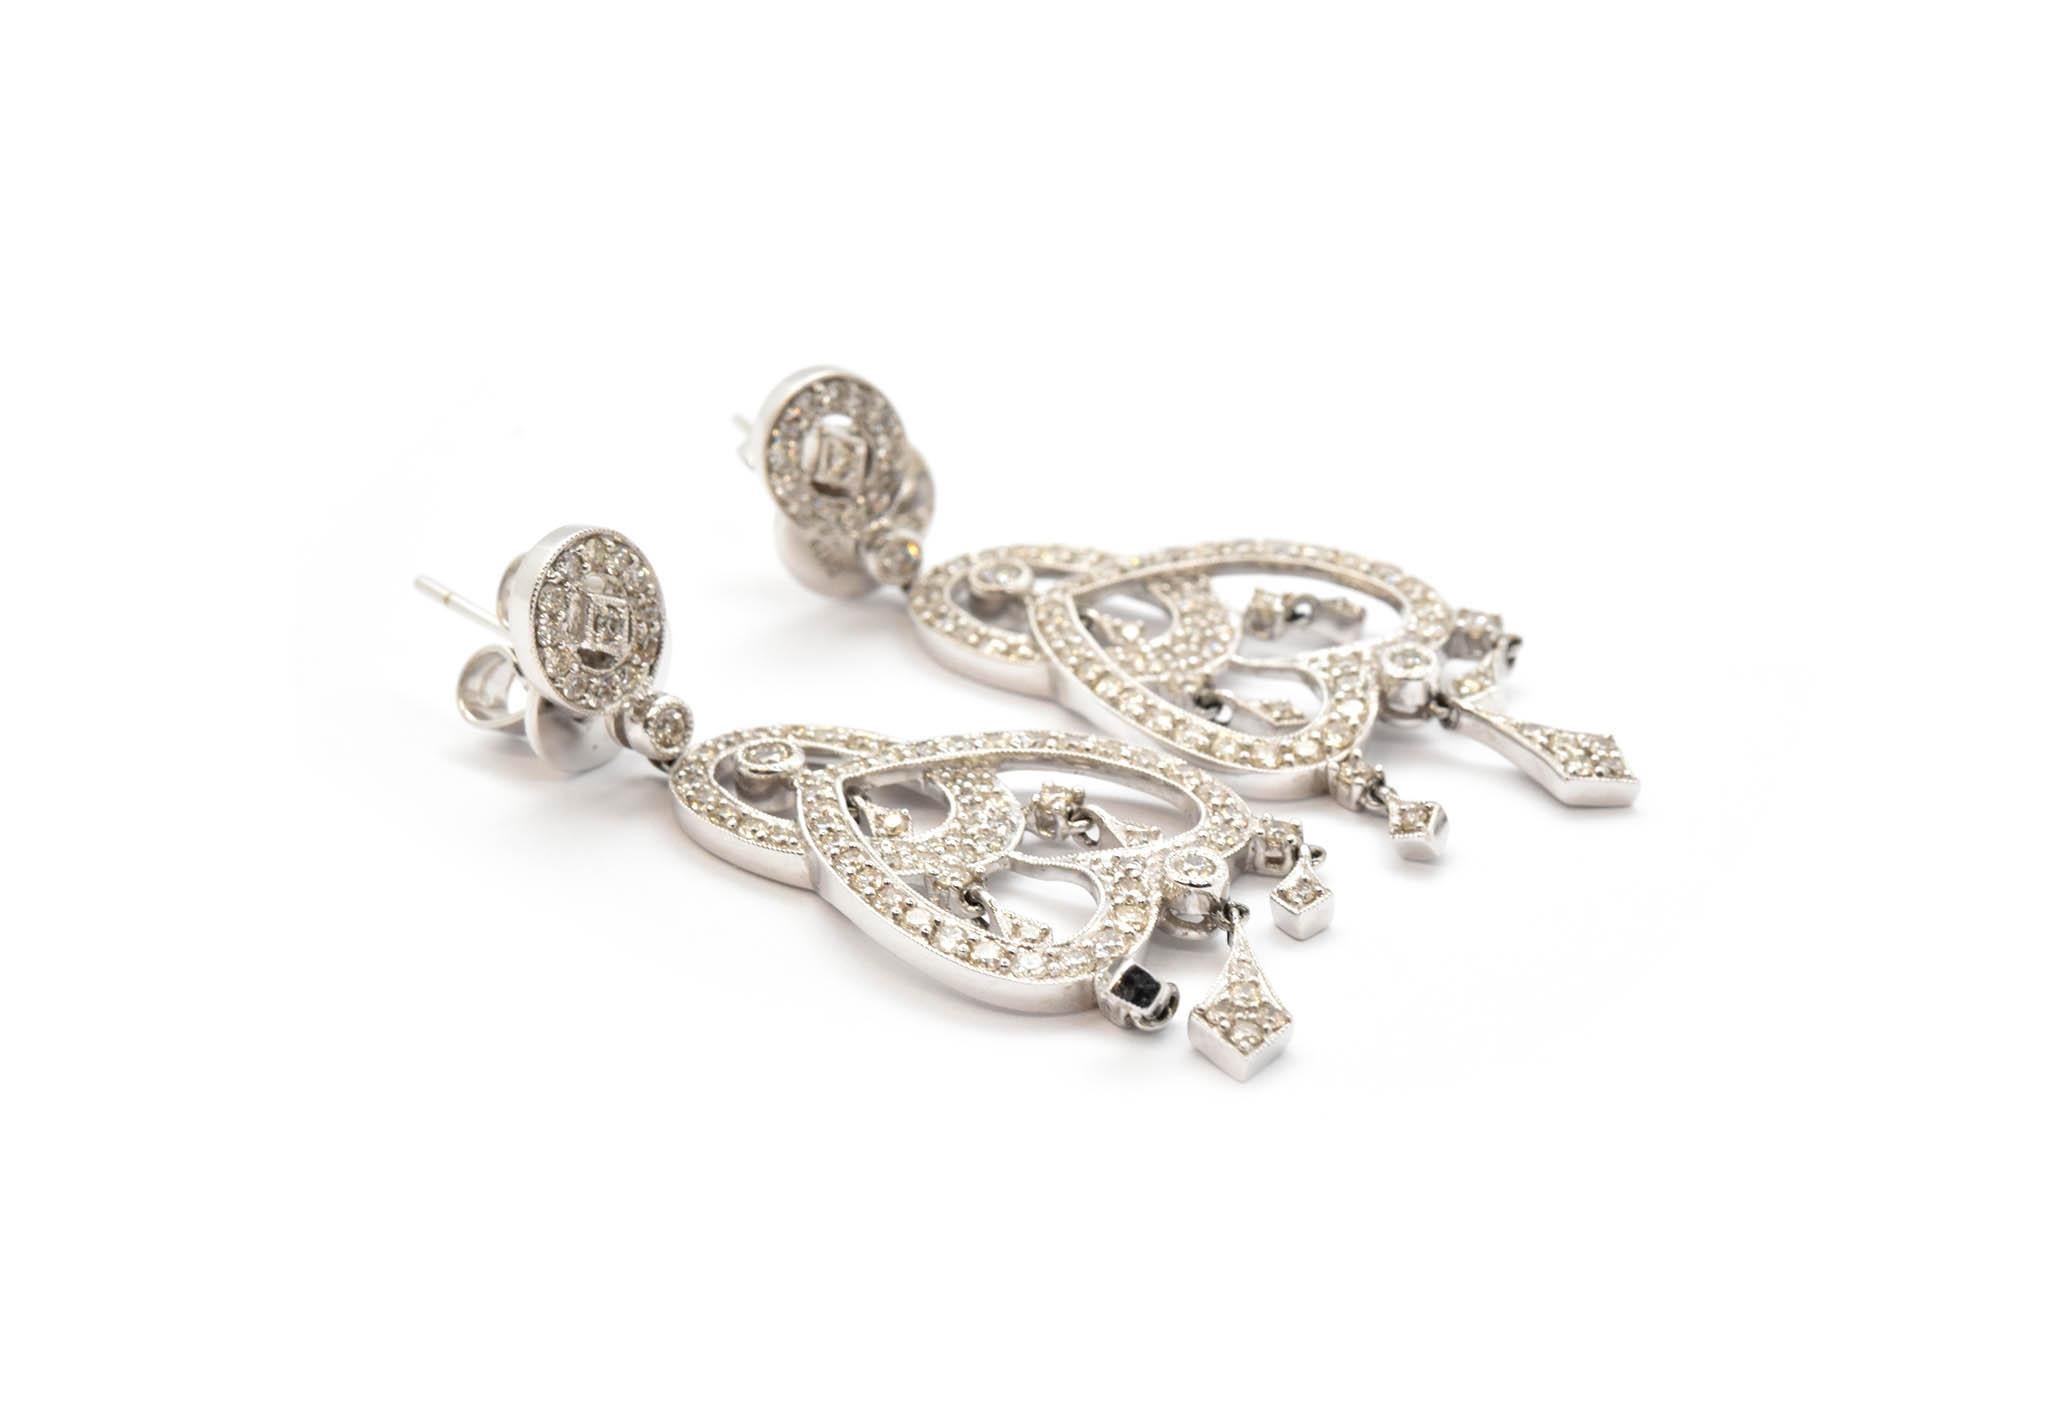 Designed in 18k white gold, these chandelier diamond earrings are the perfect way to show off your superior class. 1.75 carats of round brilliant diamonds are set into these gorgeous chandelier earrings! Six different parts of the earrings dangle by